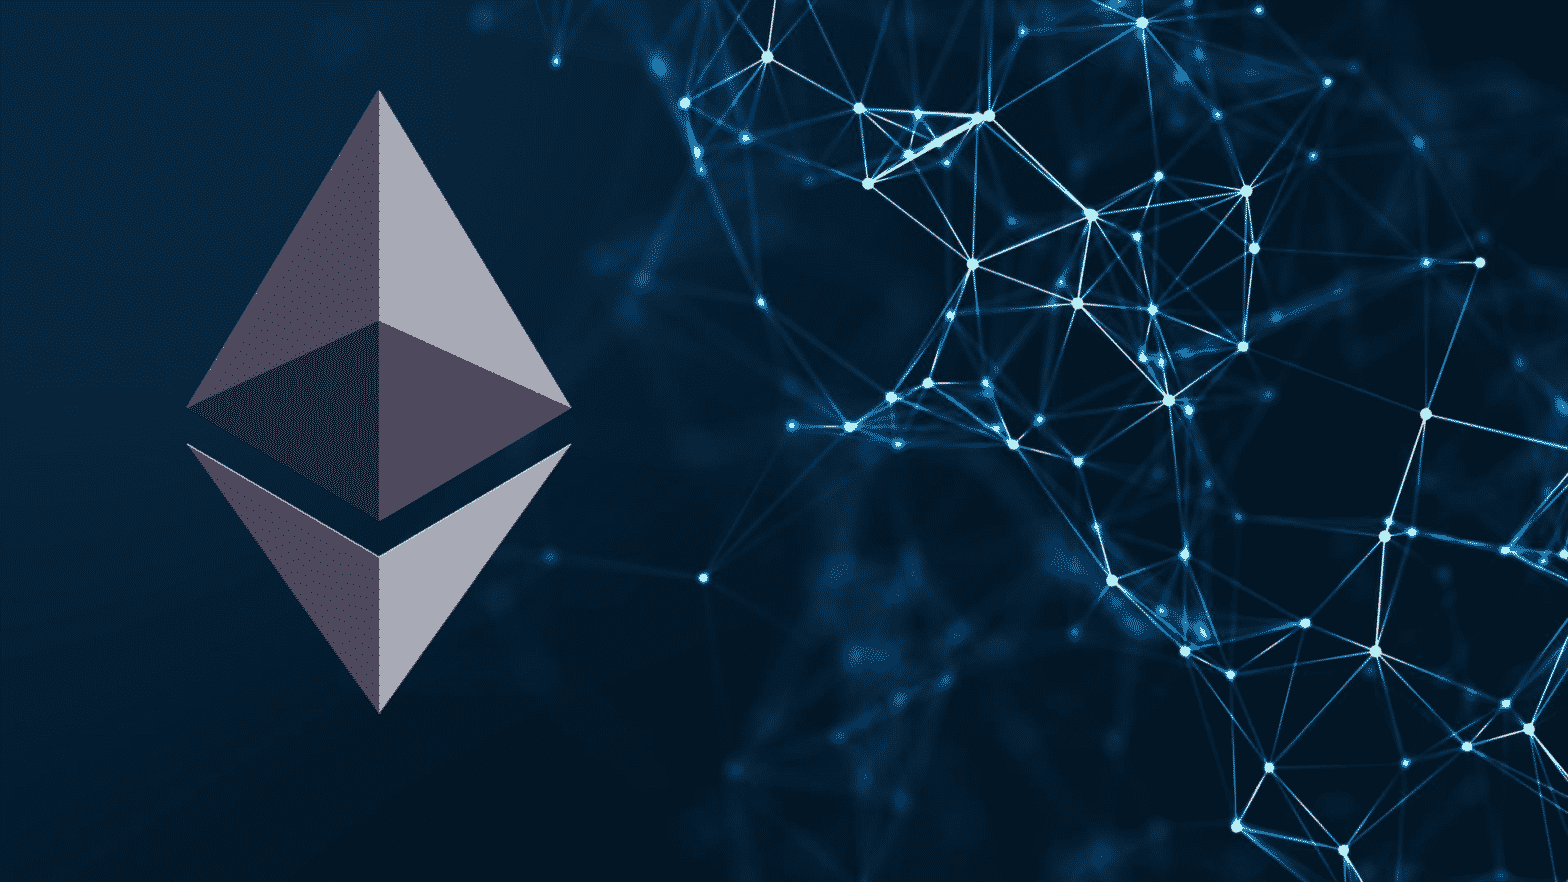  Will Ethereum (ETH) Be Able to Move Ahead of the Ongoing Bearish Sentiment?